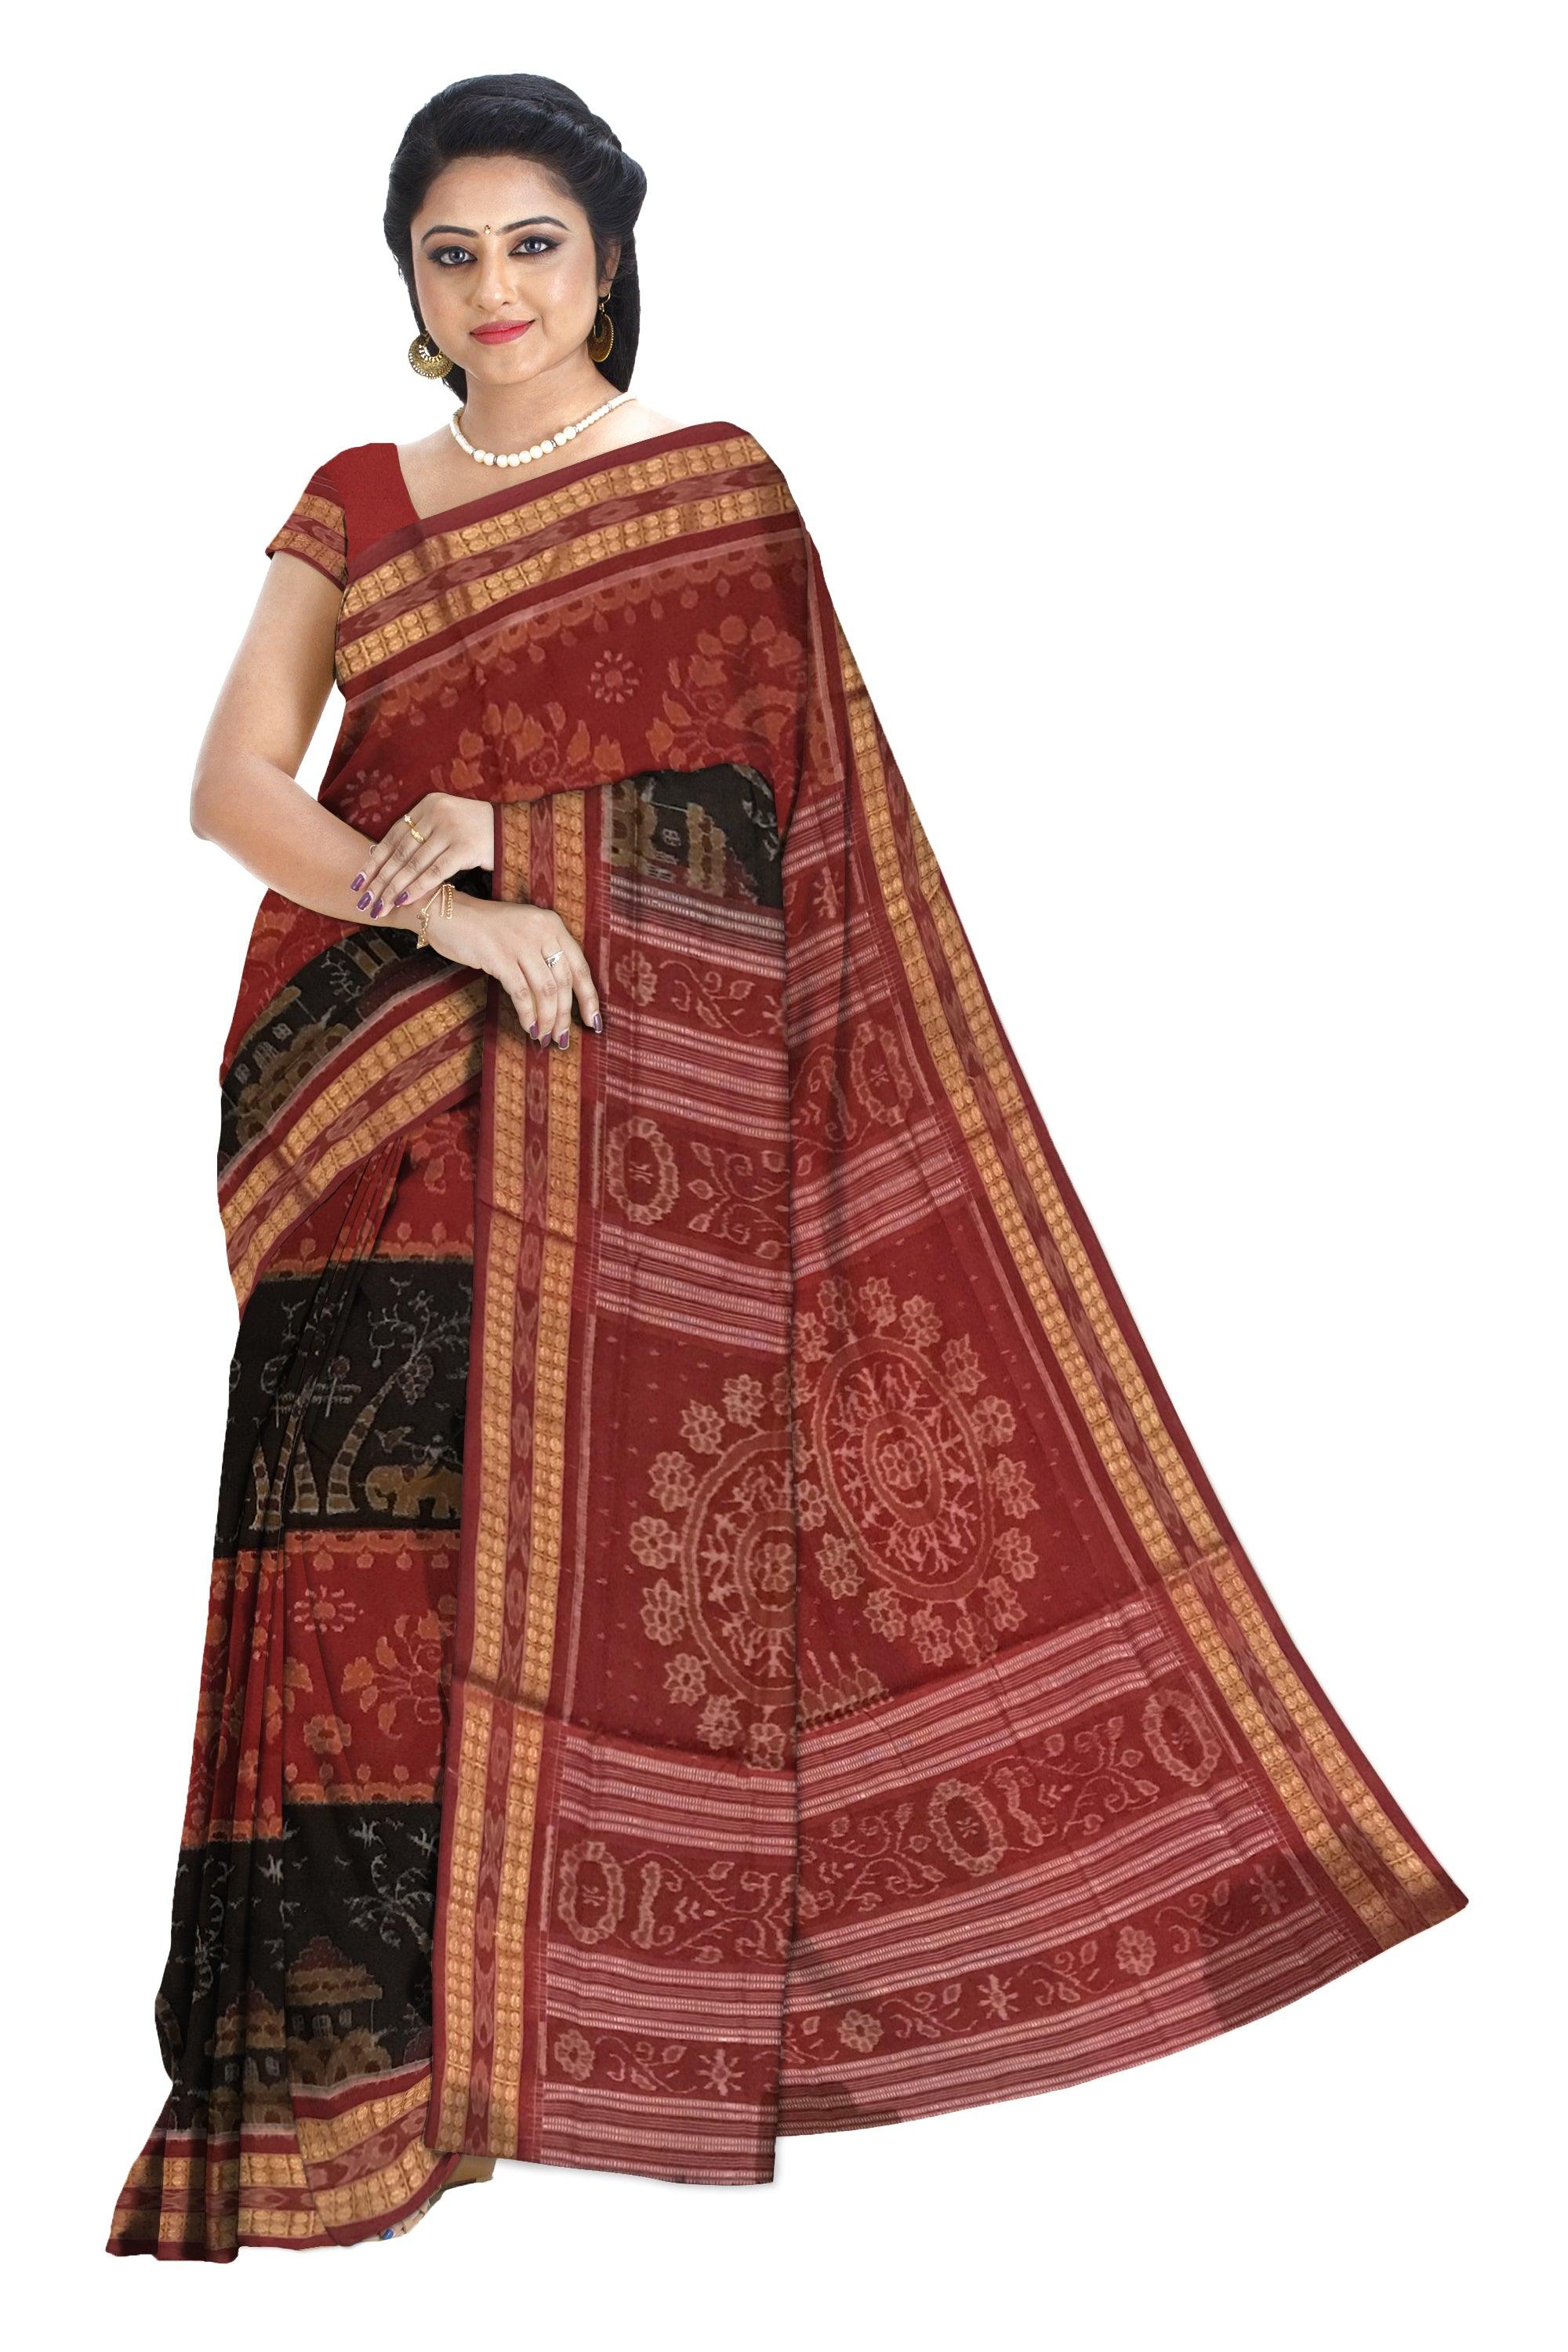 TRADITIONAL VILLAGE PATERN SAMBALPURI COTTON SAREE IS MAROON AND BLACK COLOR BASE, ATTACHED WITH BLOUSE PIECE. - Koshali Arts & Crafts Enterprise